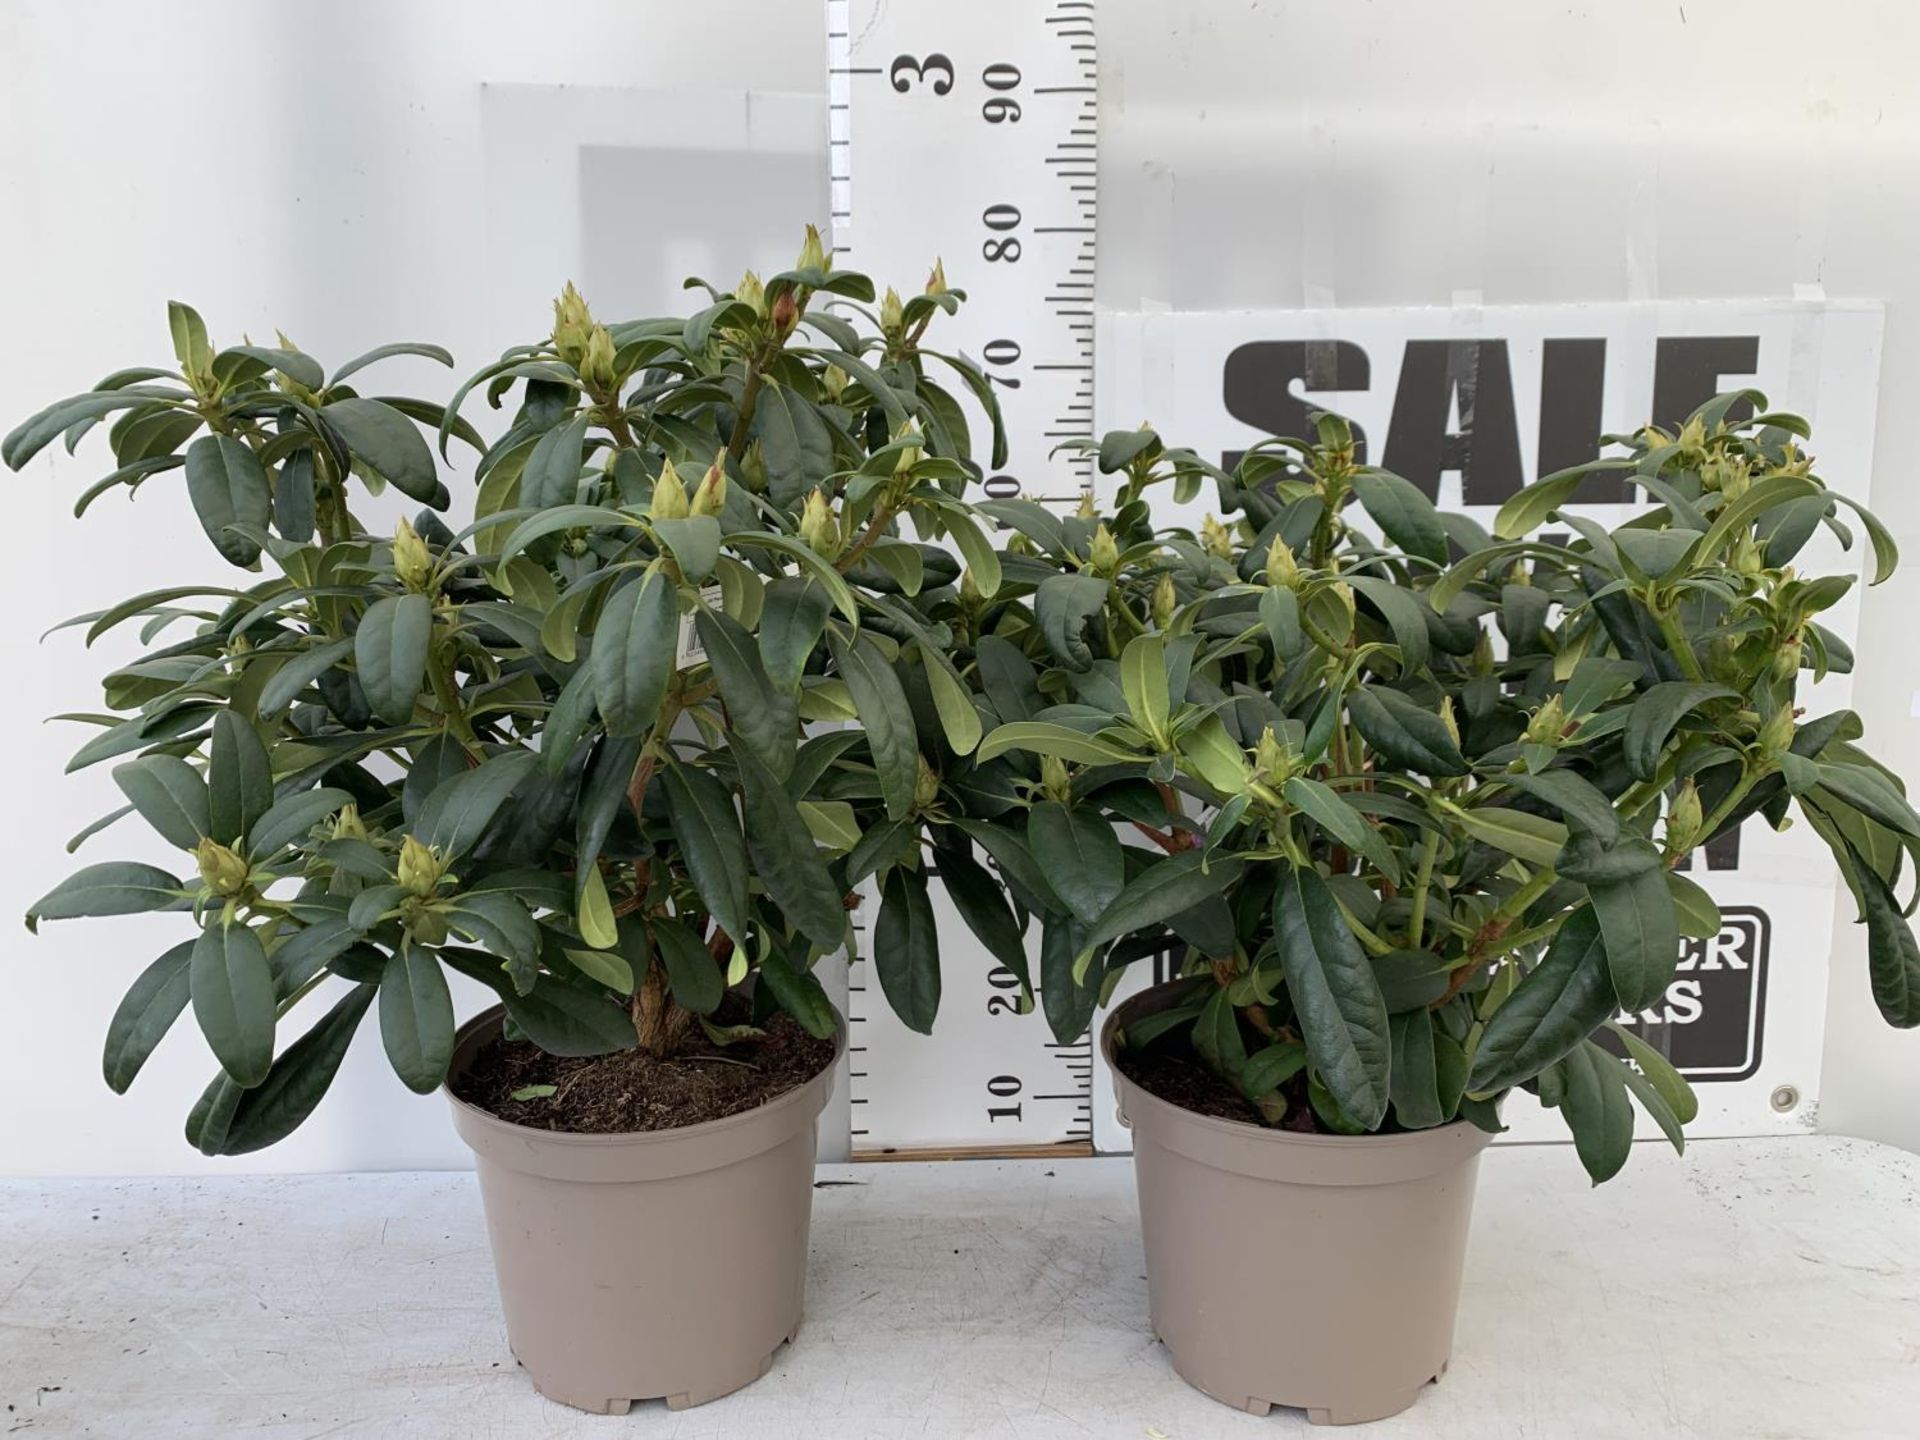 TWO LARGE RHODODENDRONS LIBRETTO PURPLE IN 7.5 LTR POTS APPROX 70CM IN HEIGHT PLUS VAT TO BE SOLD